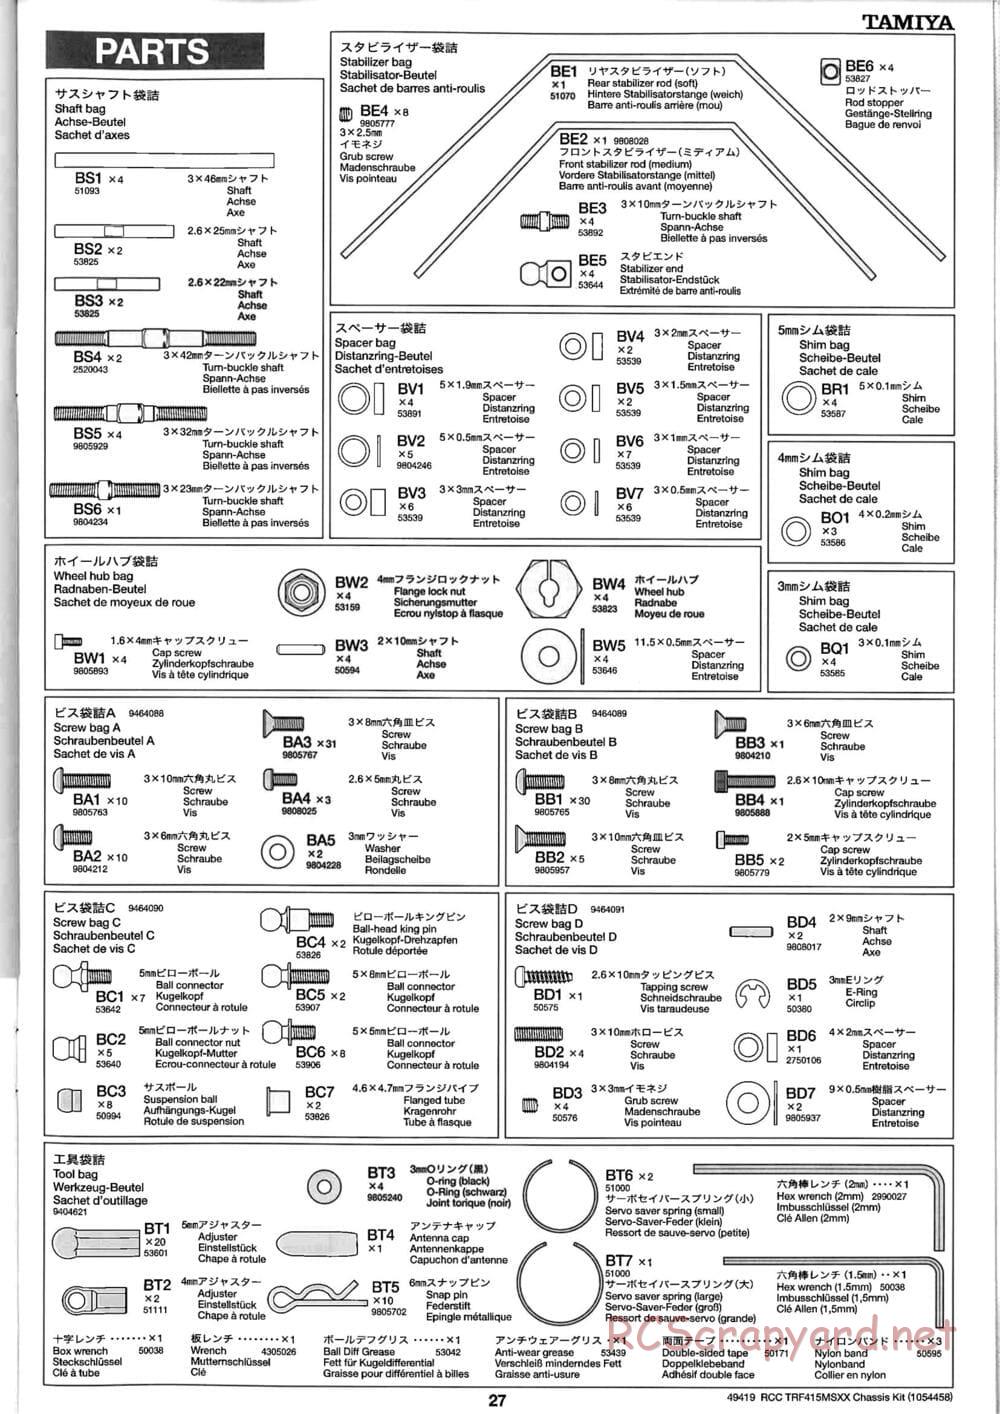 Tamiya - TRF415-MSXX Chassis - Manual - Page 27